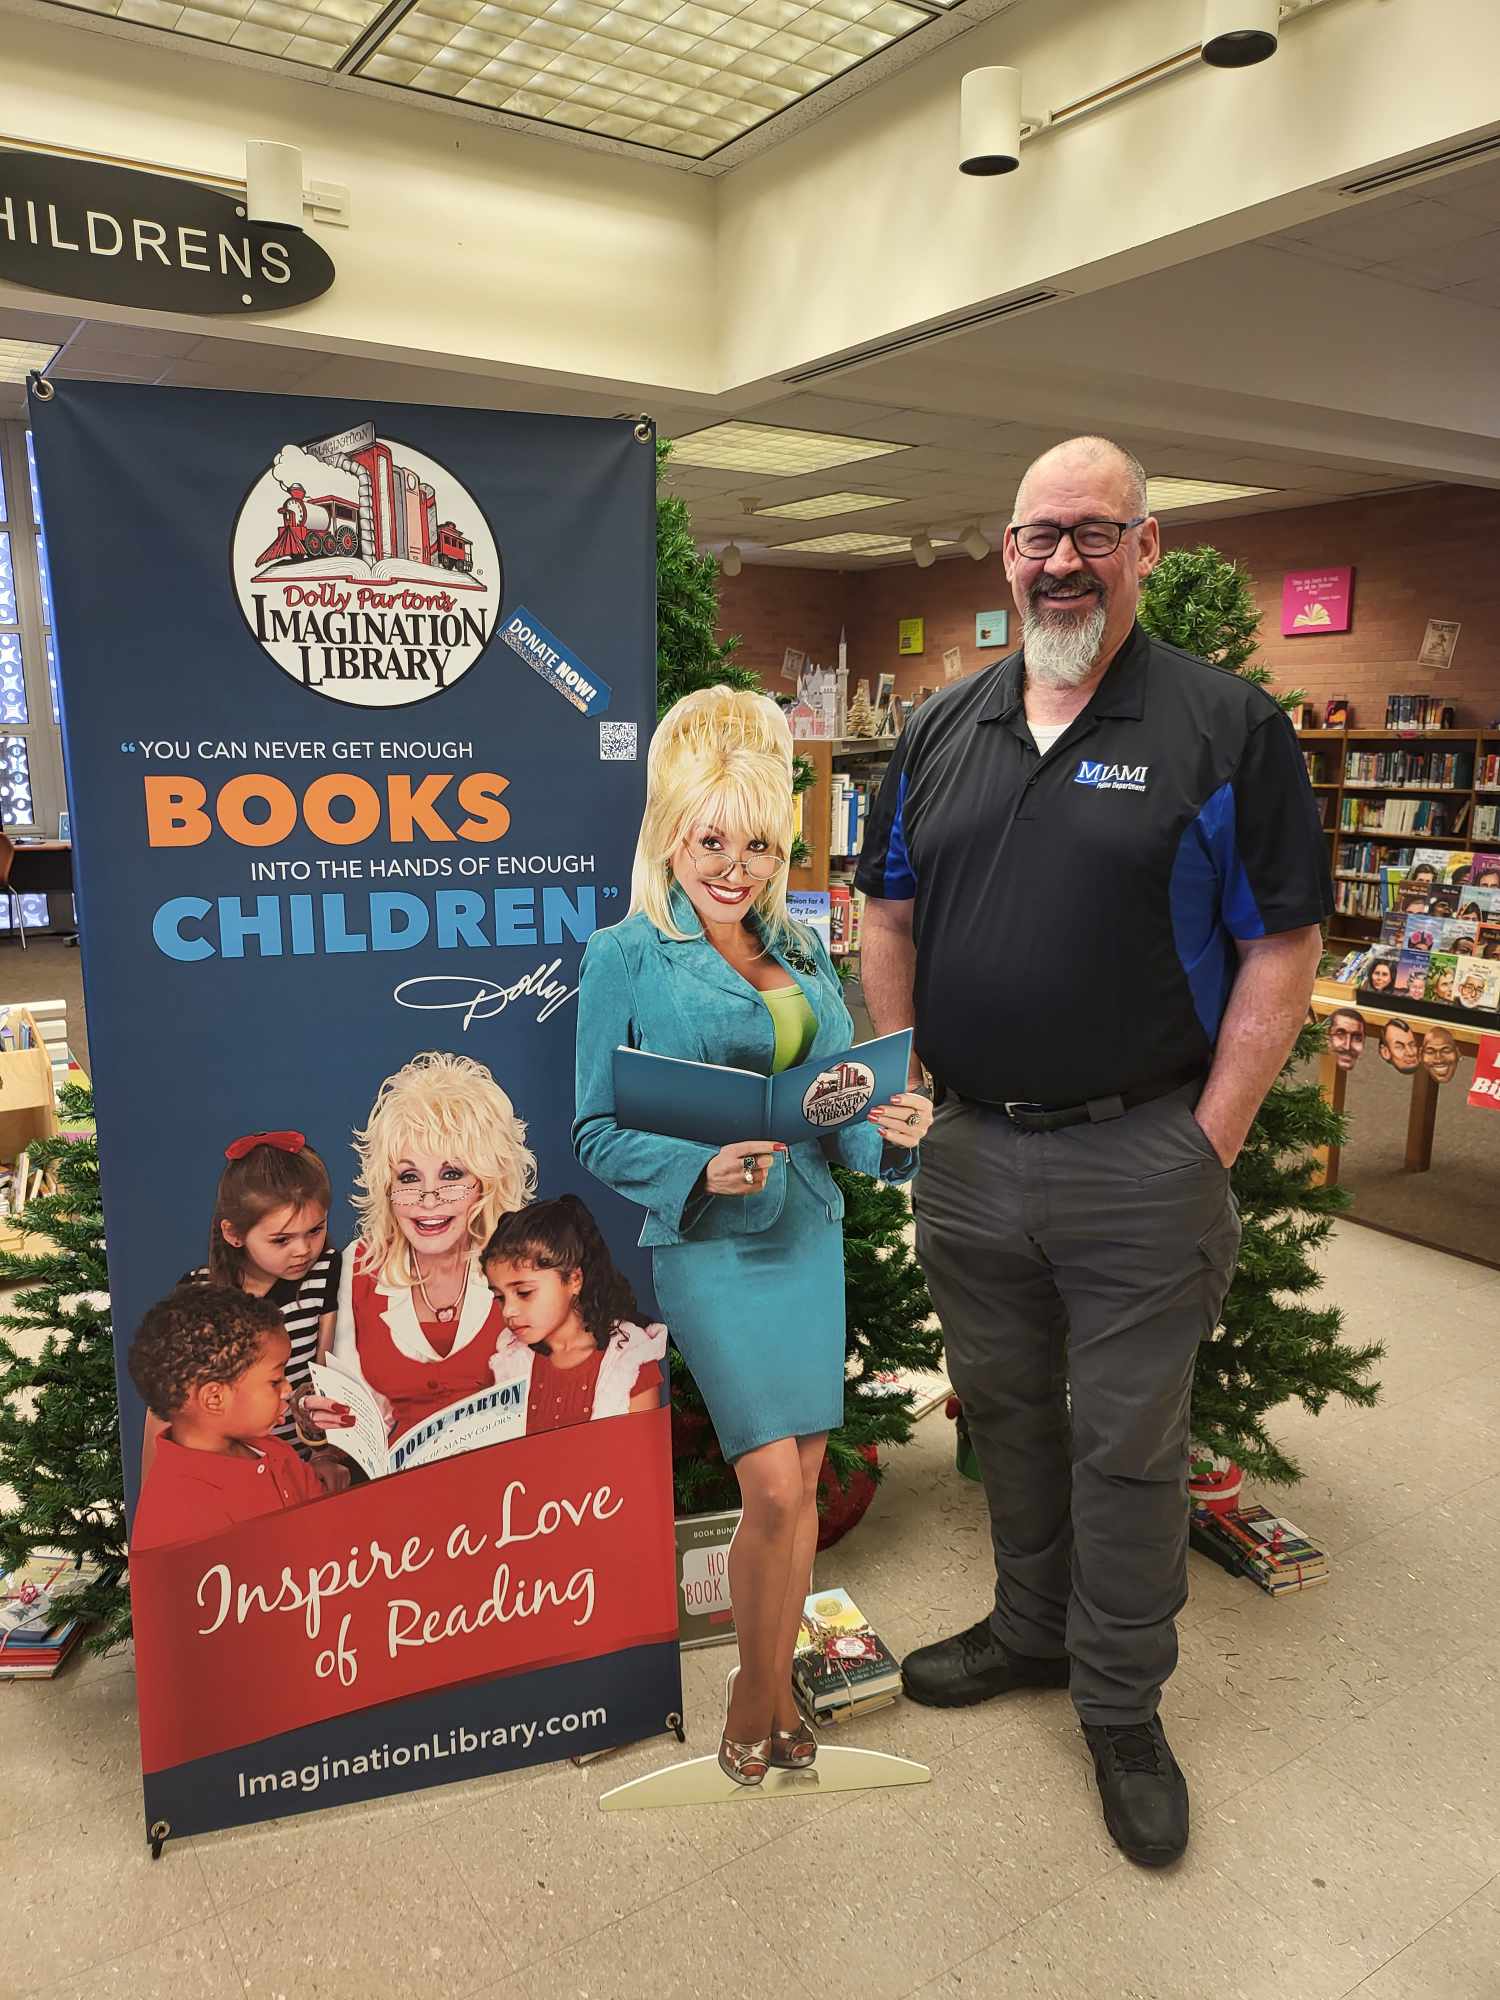 Chief Anderson also known as "Hightower" standing in Miami Public Library next to a life-size Dolly Parton cutout.